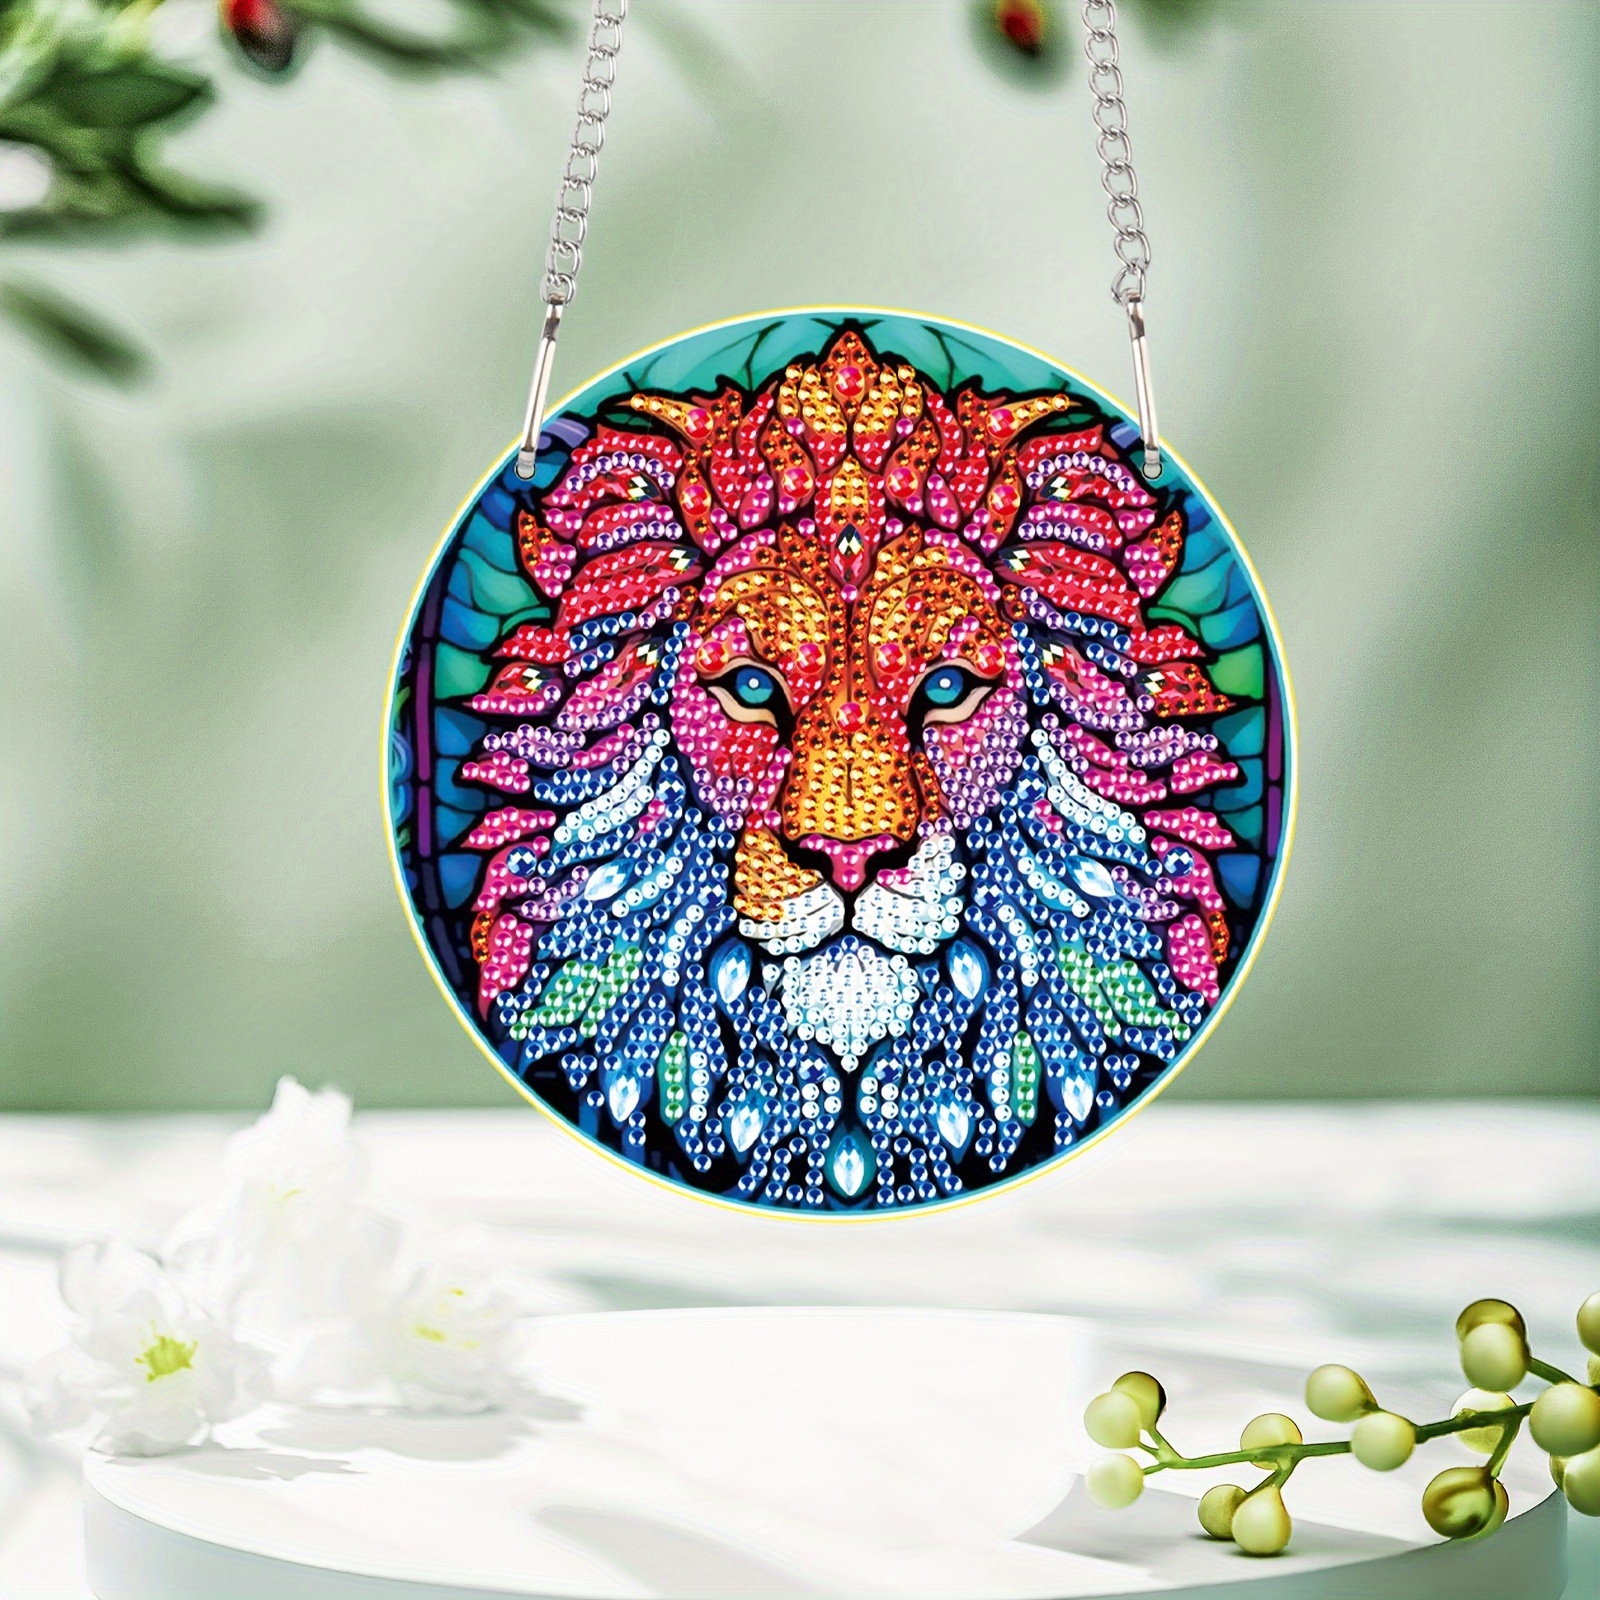 Round DIY Diamond Painting Ornaments Acrylic Diamond Art Hanging Pendant  Diamond Painting Hanging Sign Crystal Painting Ornament